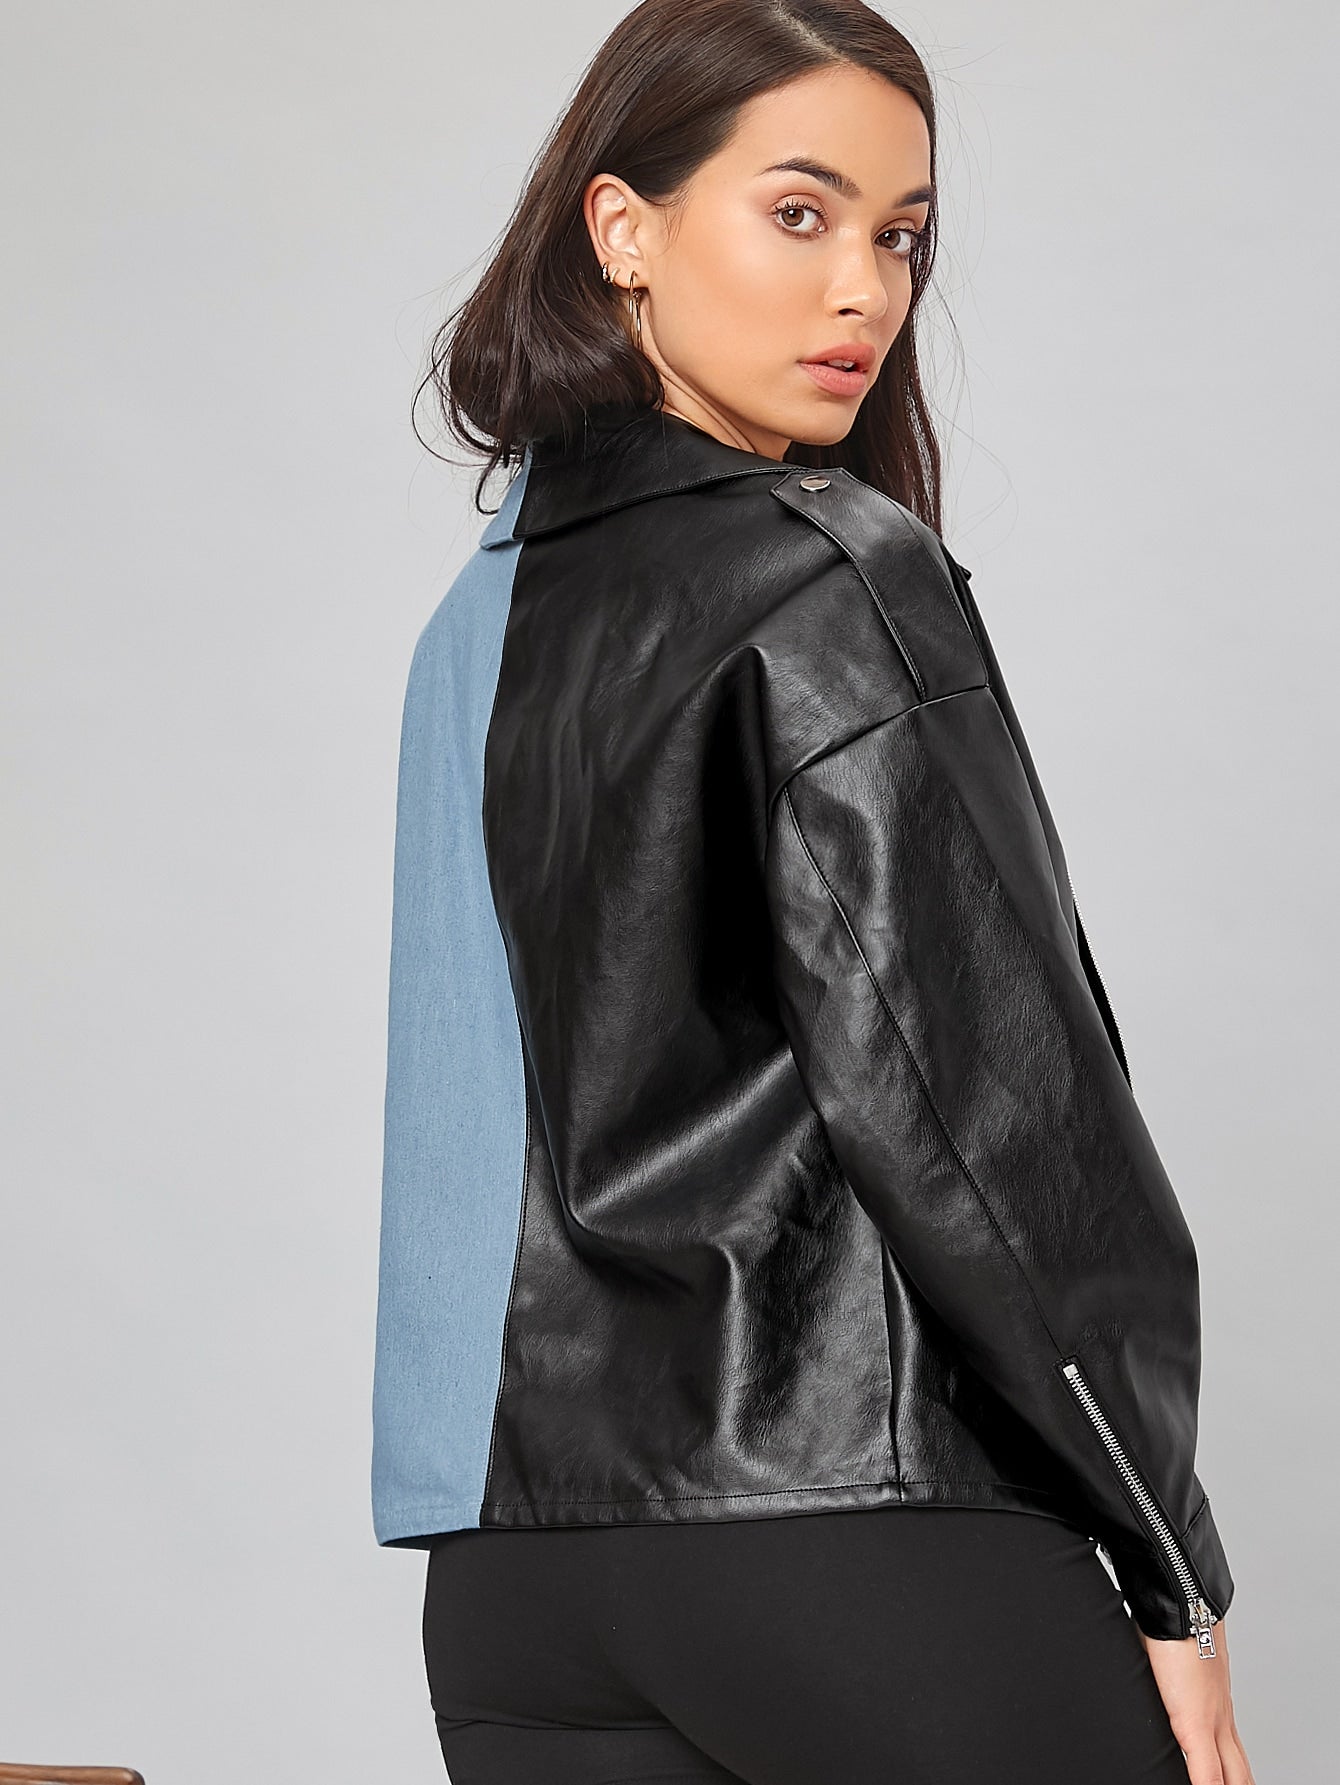 Notched Collar Zip Up Spliced PU Leather Jacket